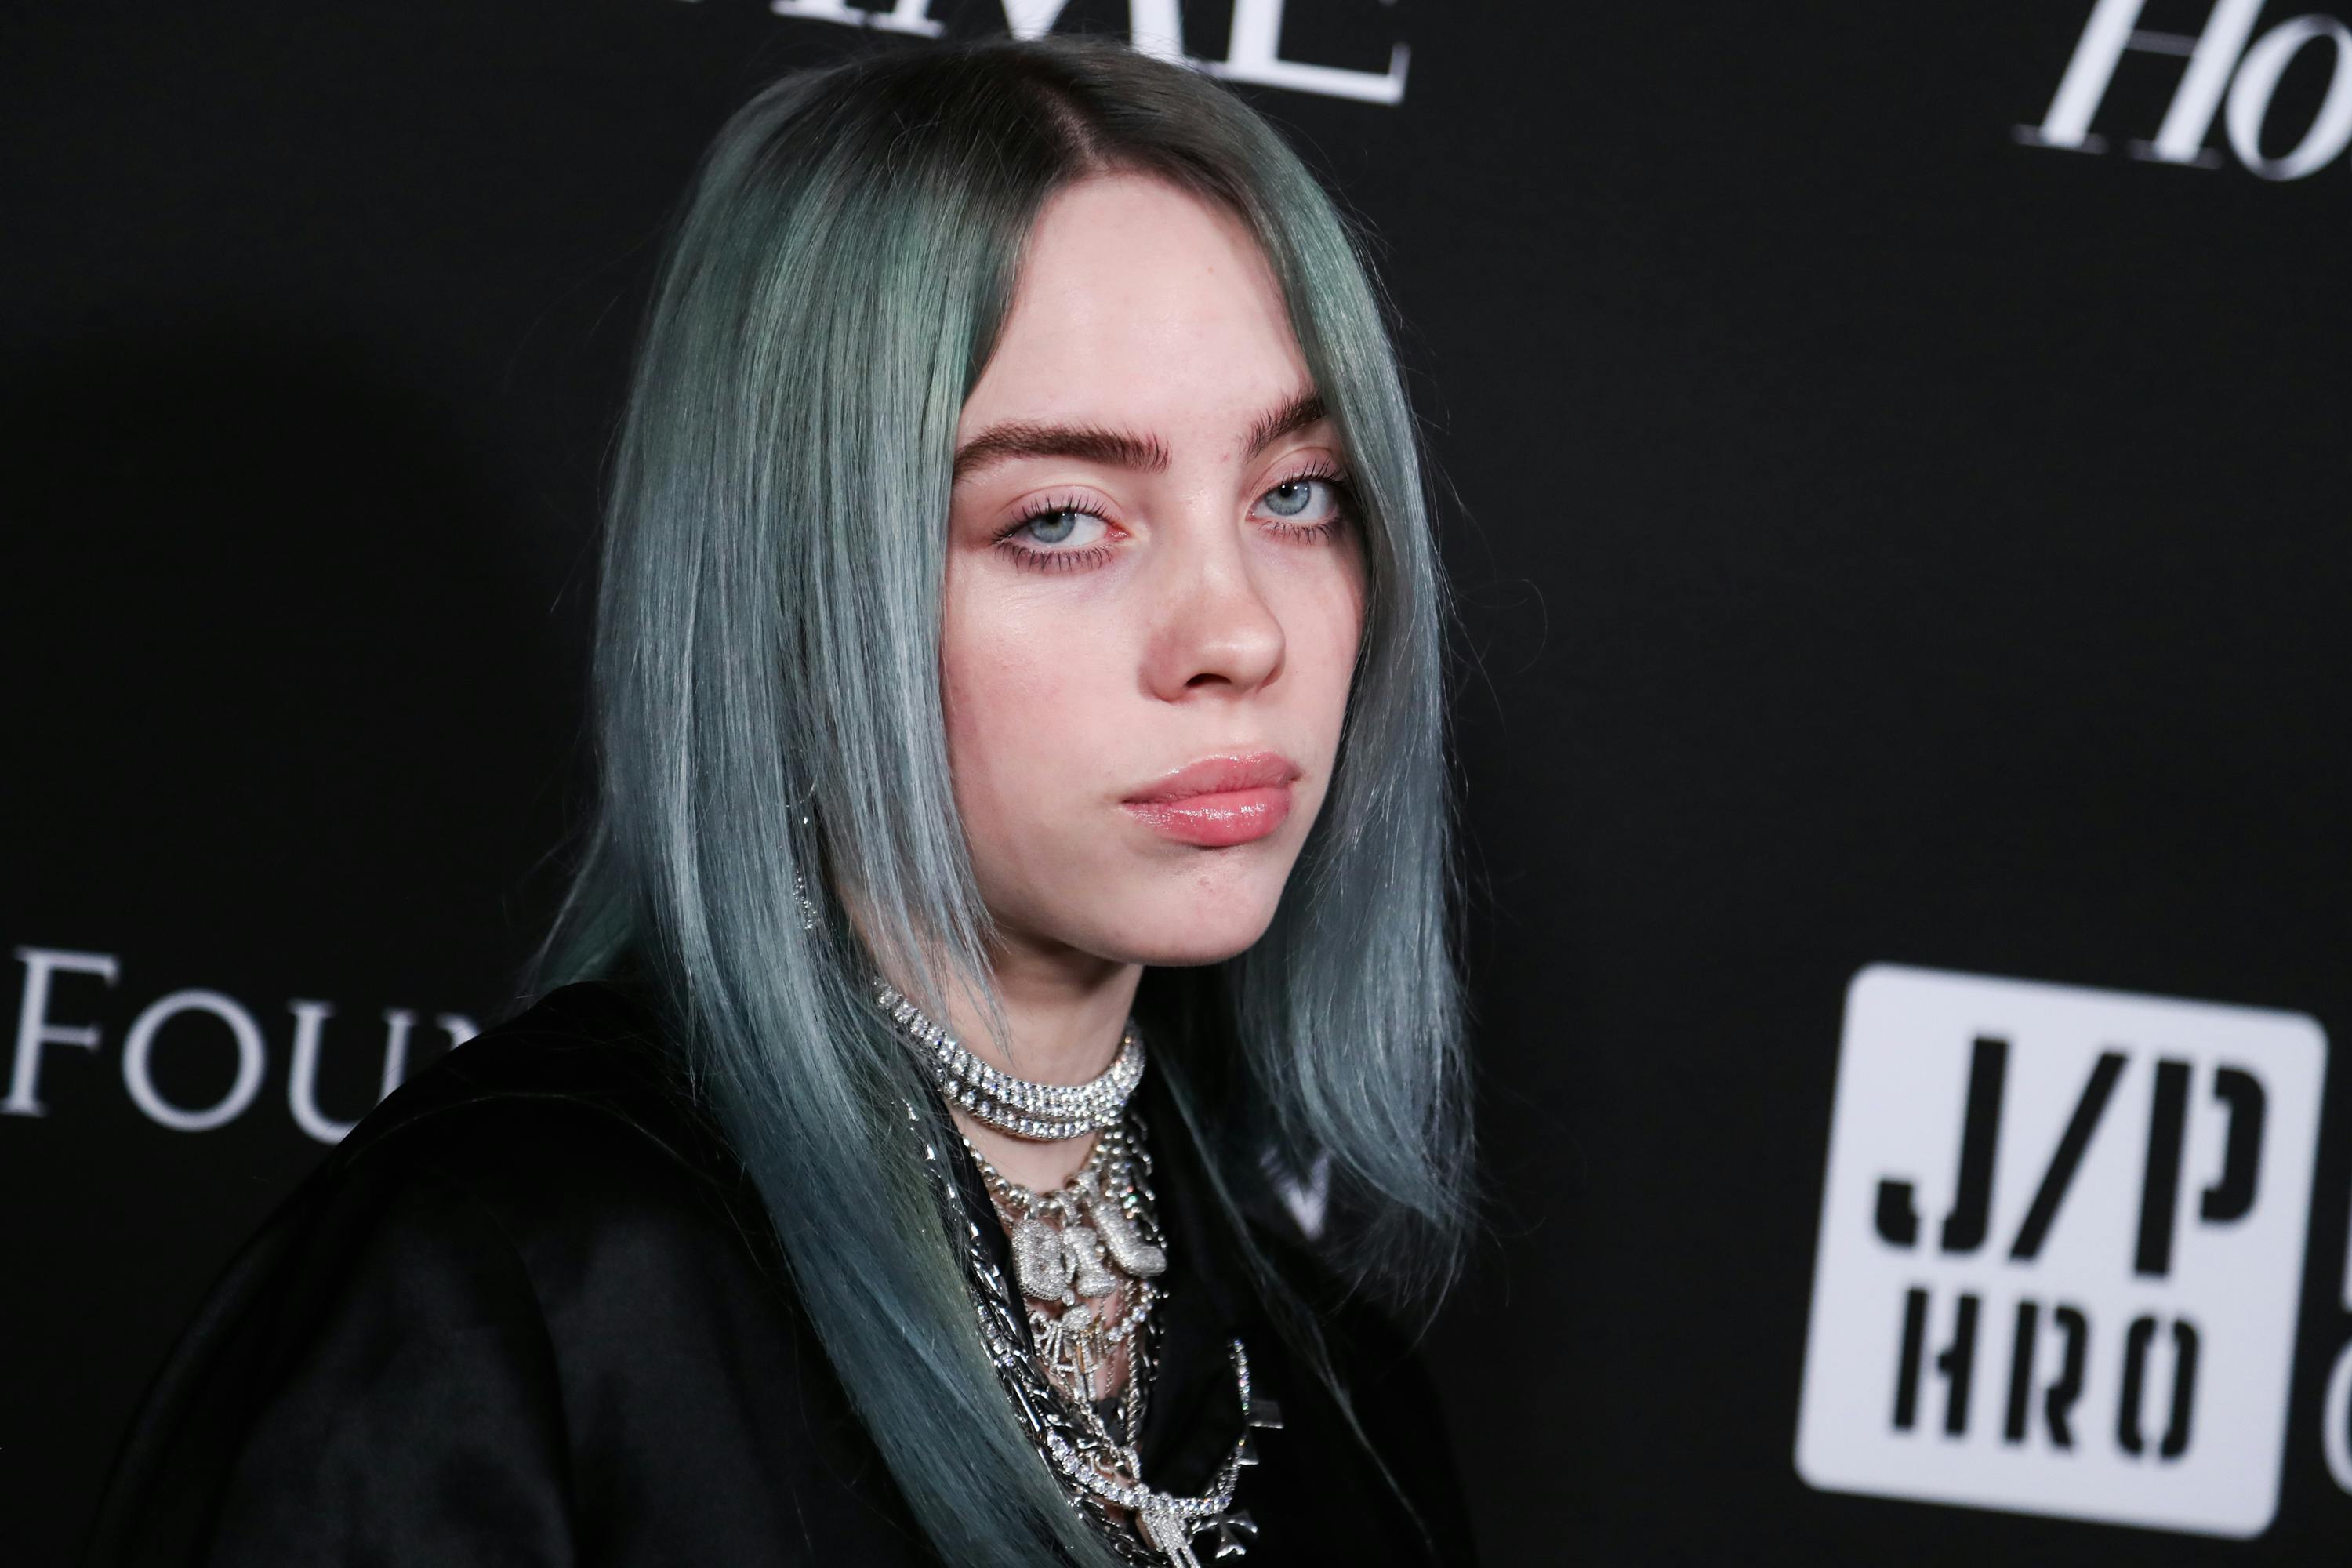 Cant Decide How To Feel About Billie Eilishs New Look? Youre Not Alone Life Grazia bild bild Foto